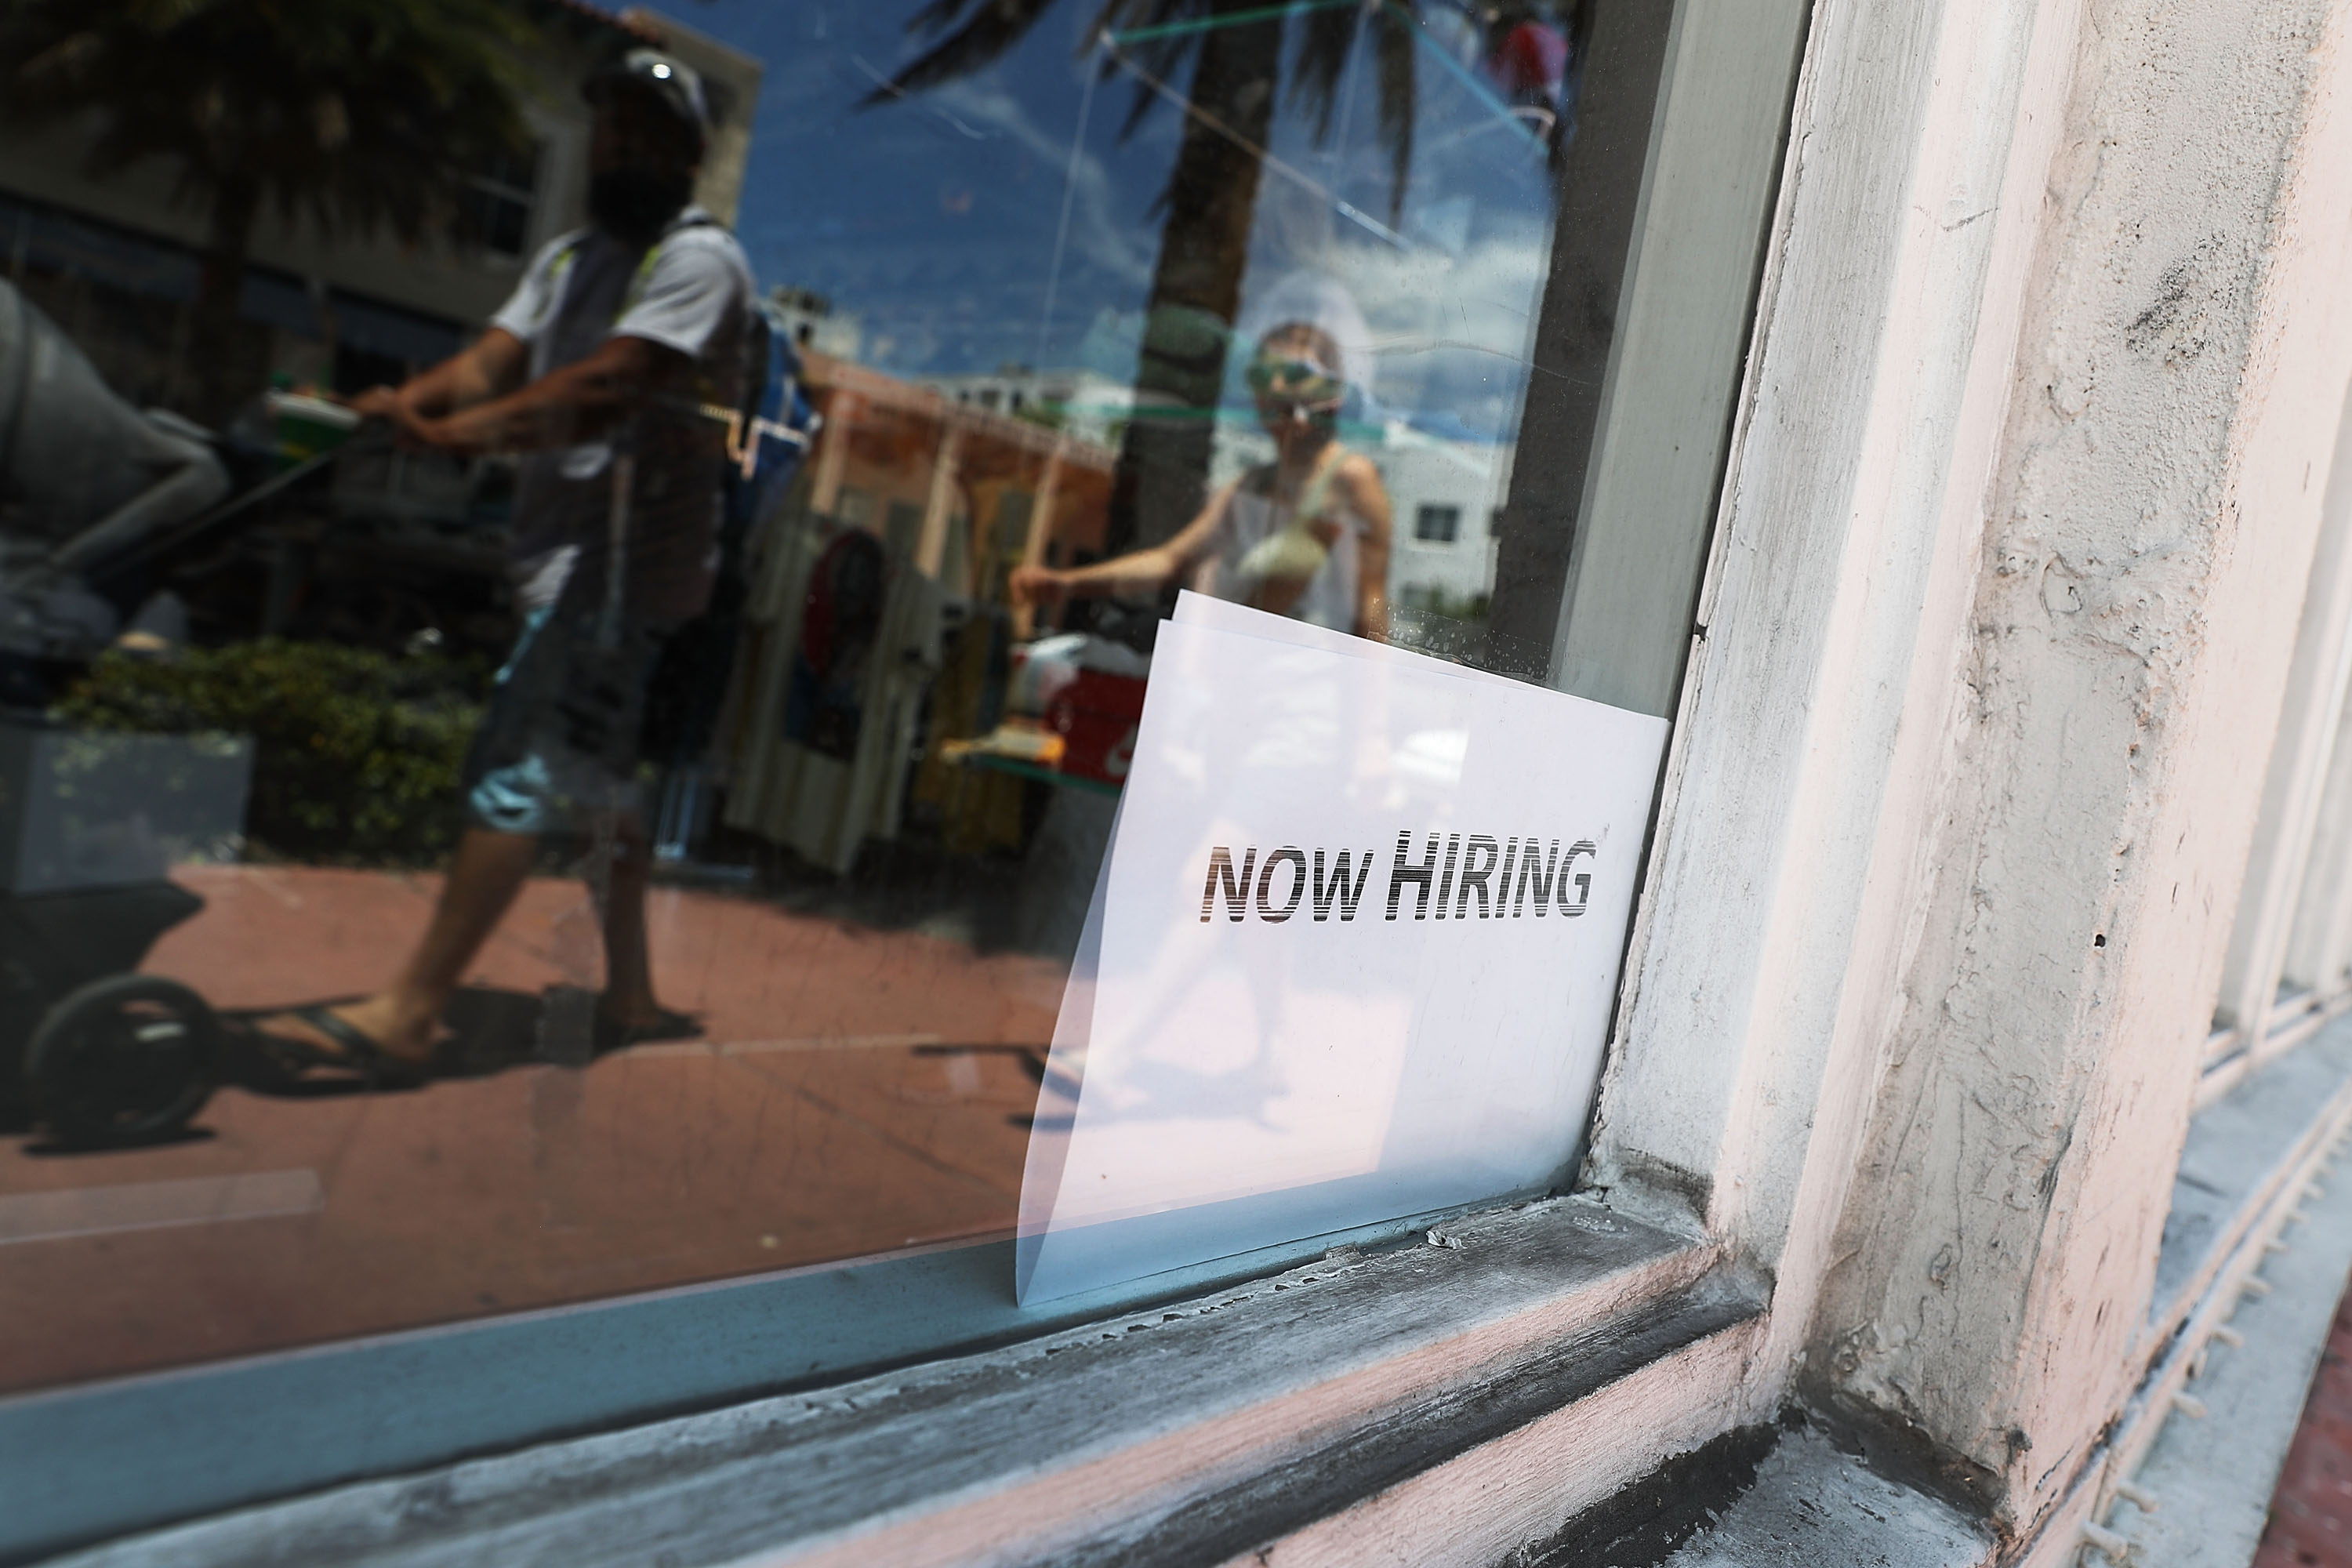 The economy added 148,000 jobs in December.